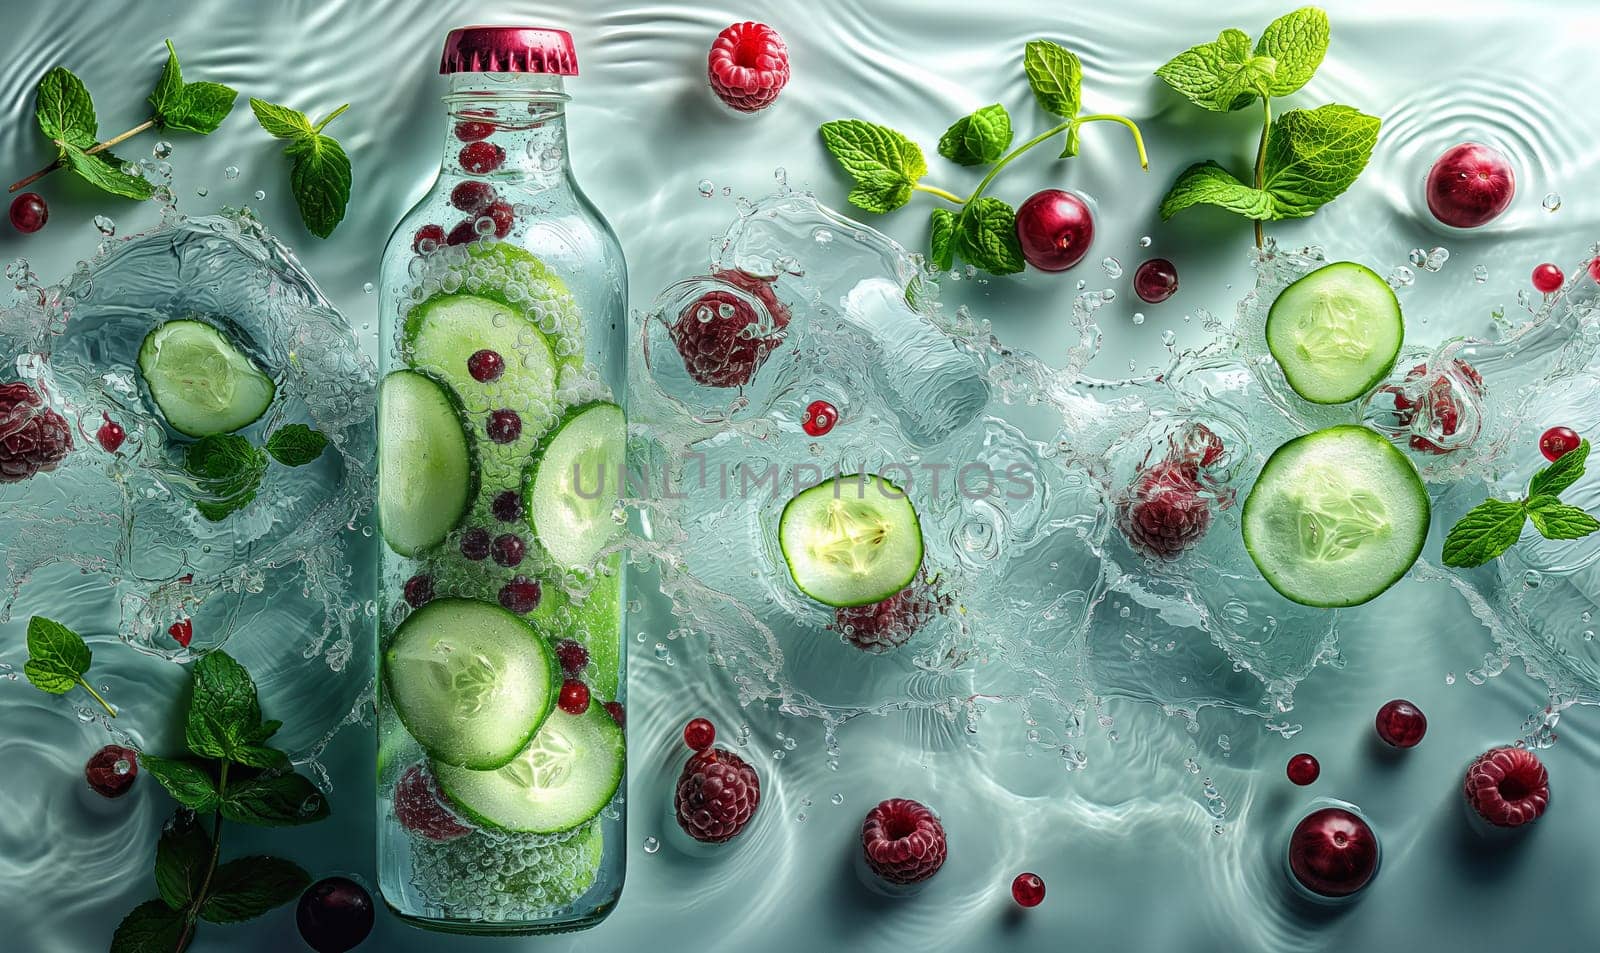 Glass Bottle Filled With Cucumbers and Berries. by Fischeron